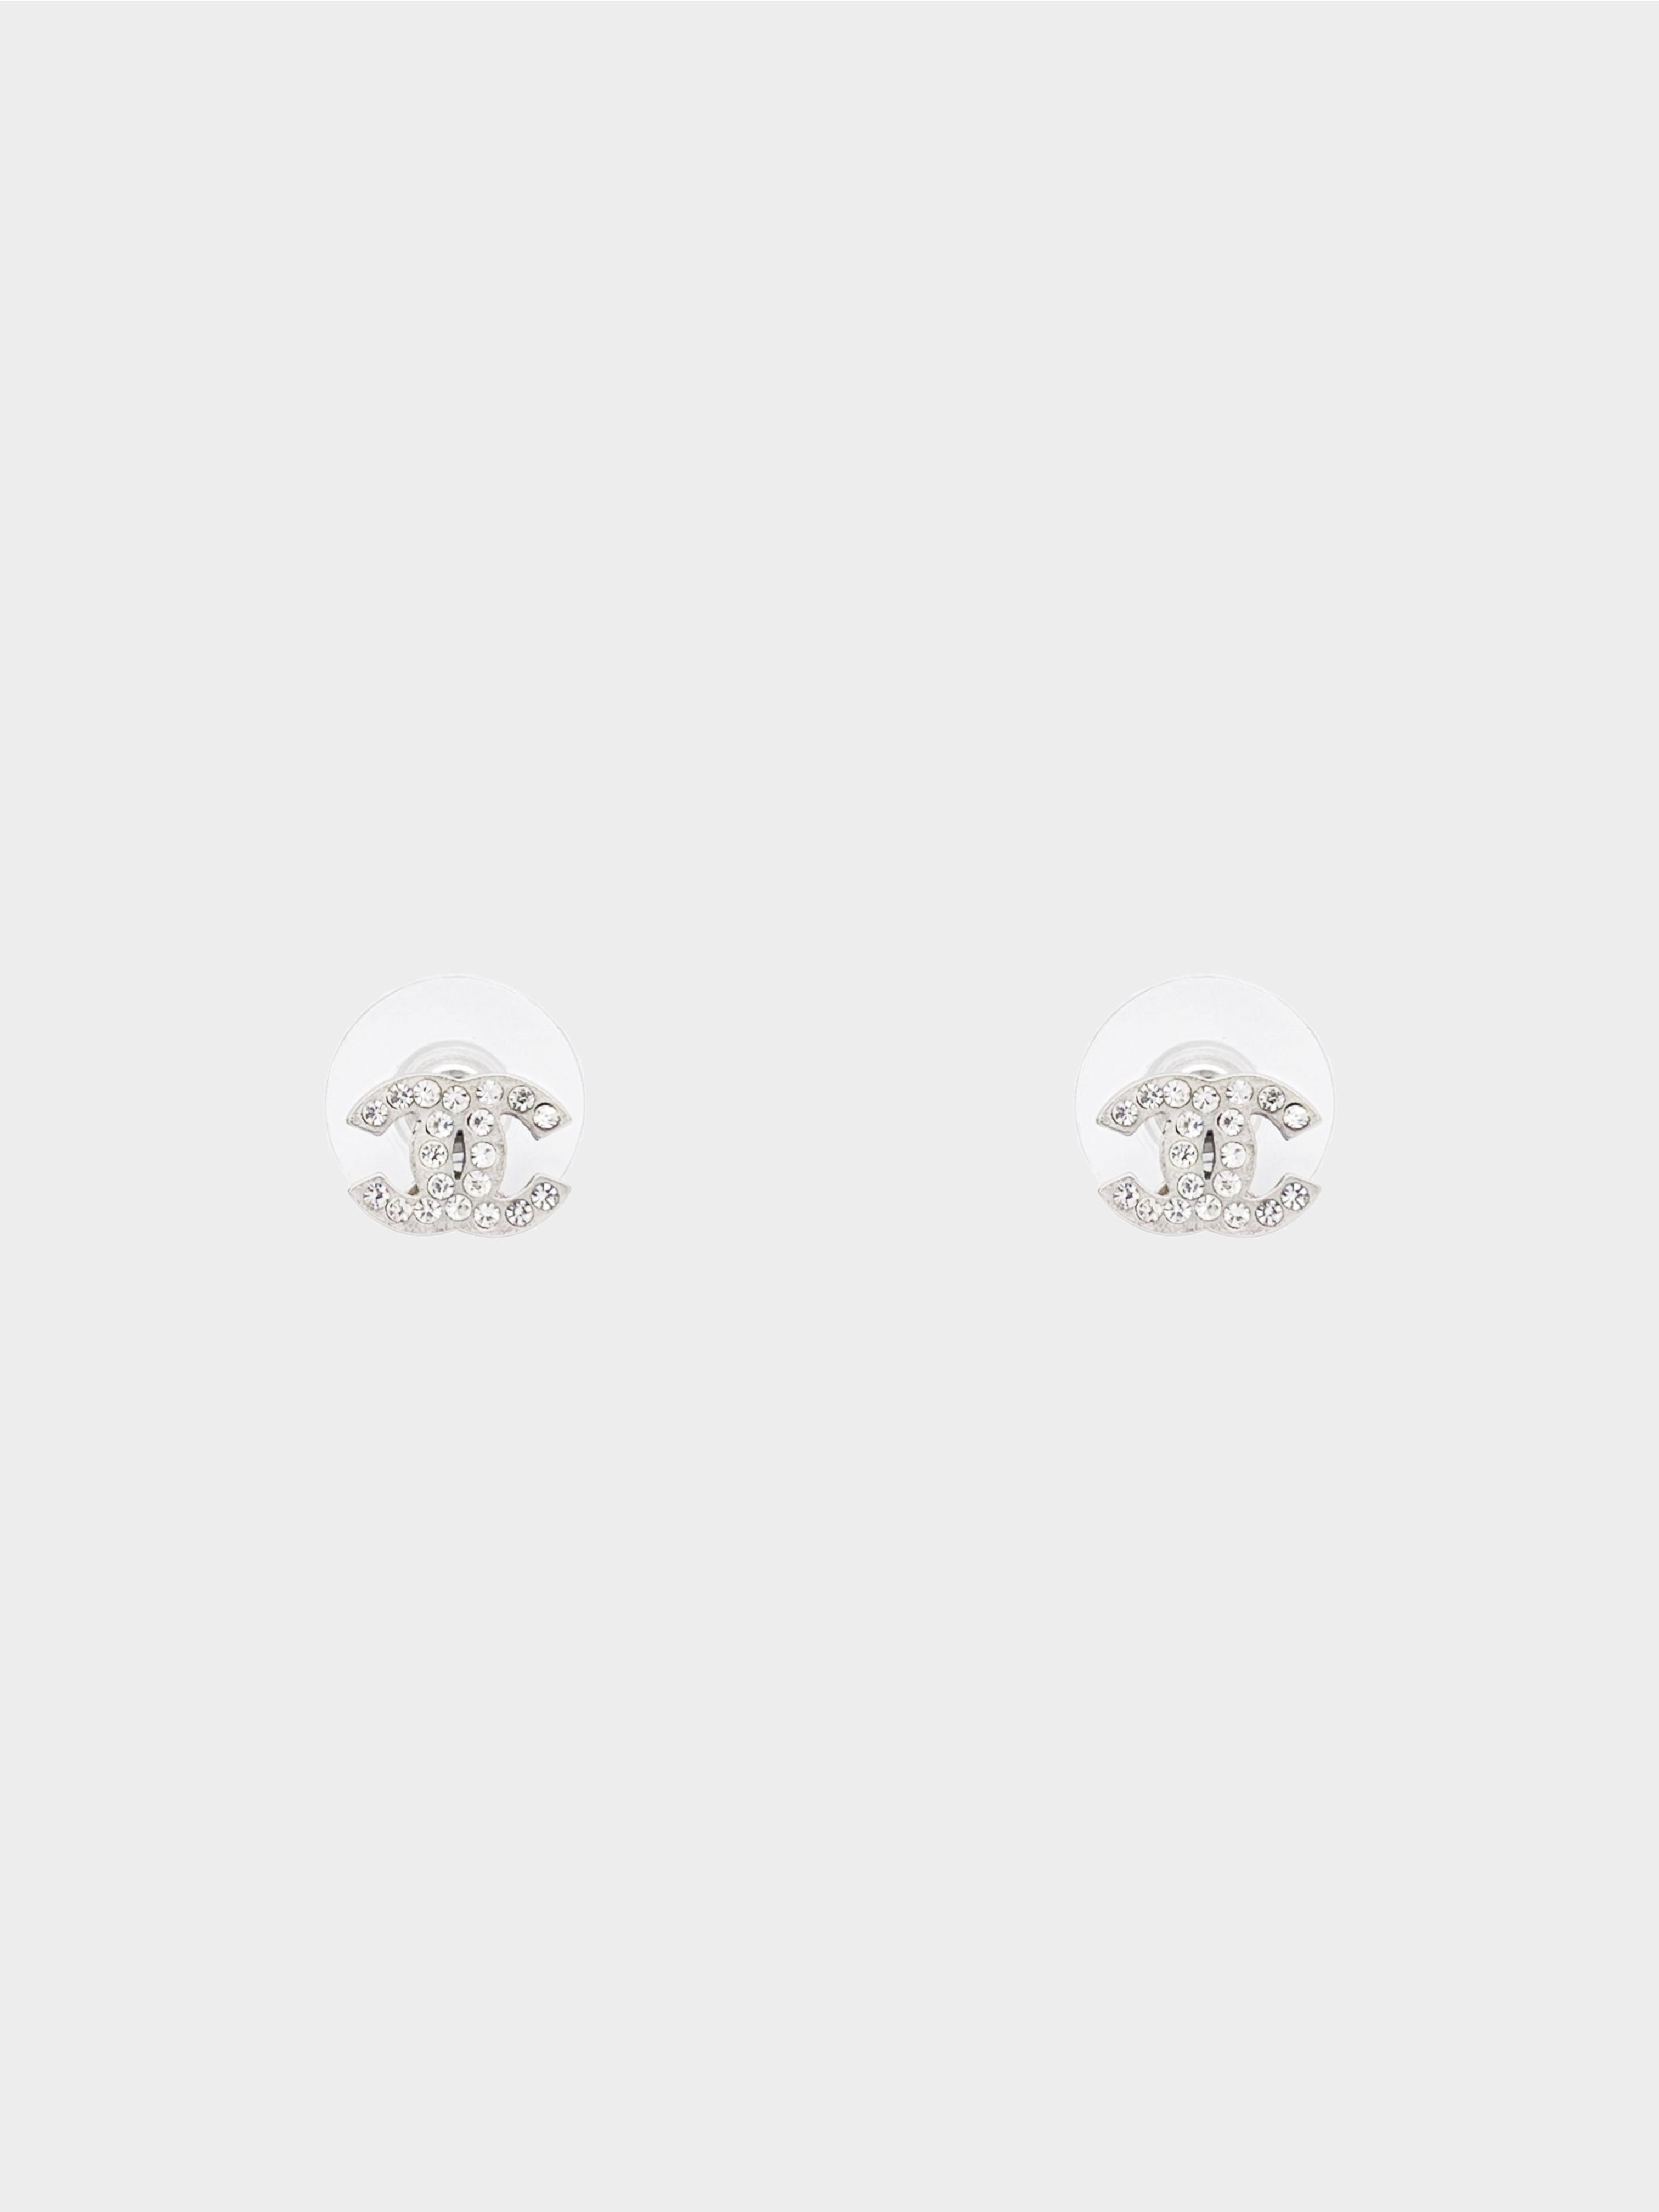 Chanel CC Crystal Silver Tone Clip-On Stud Earrings Chanel